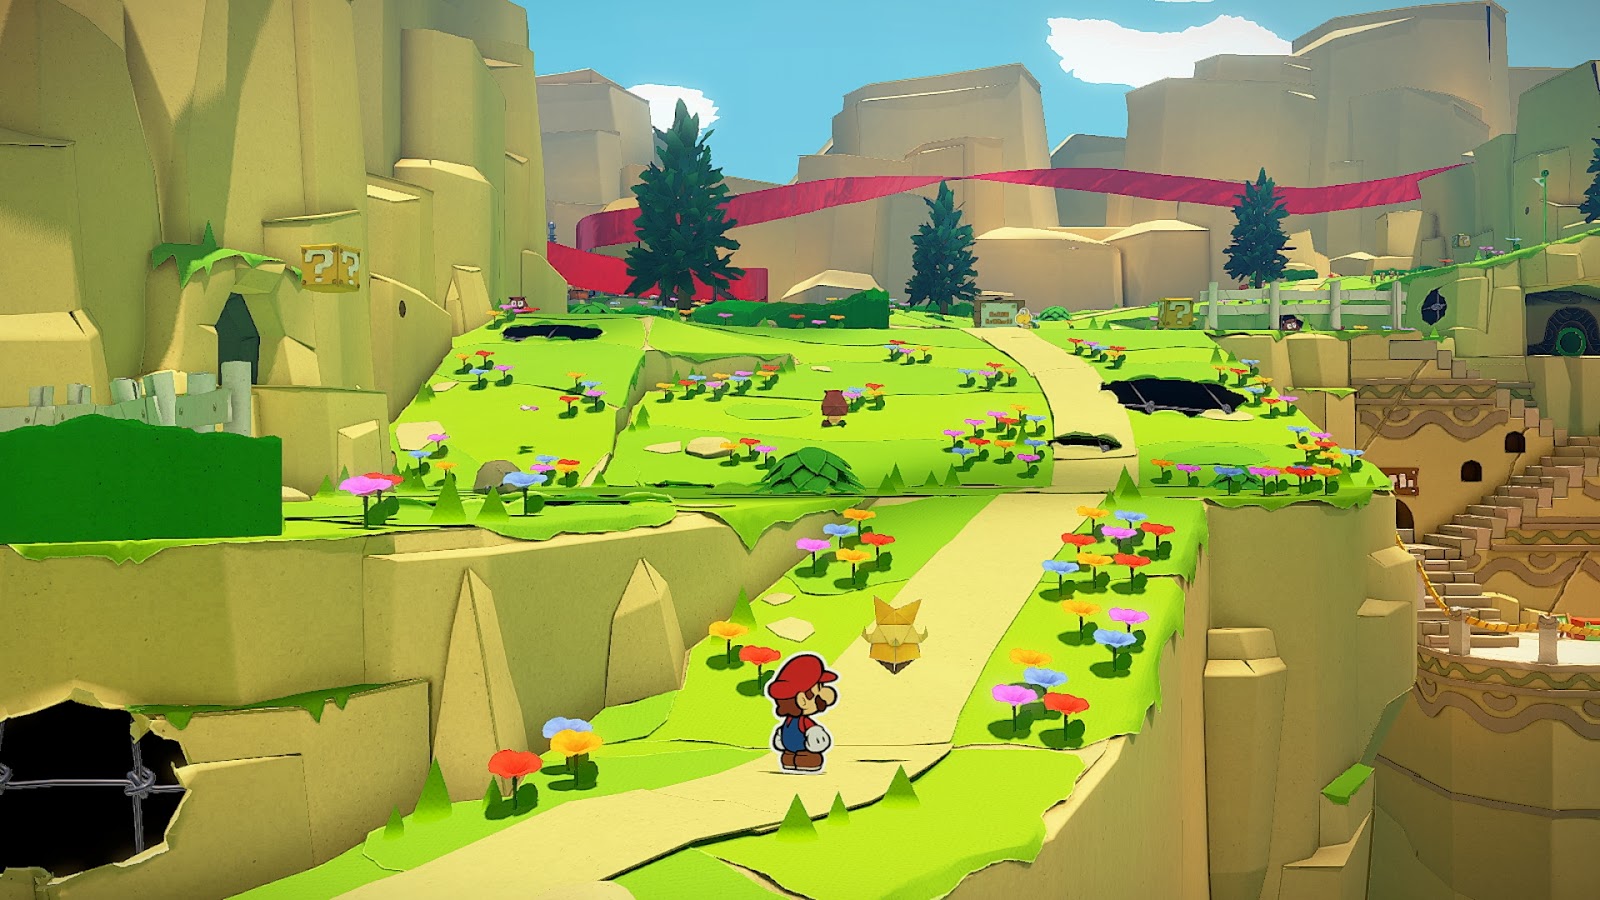 Top 10 Games of 2020: Paper Mario: The Origami king